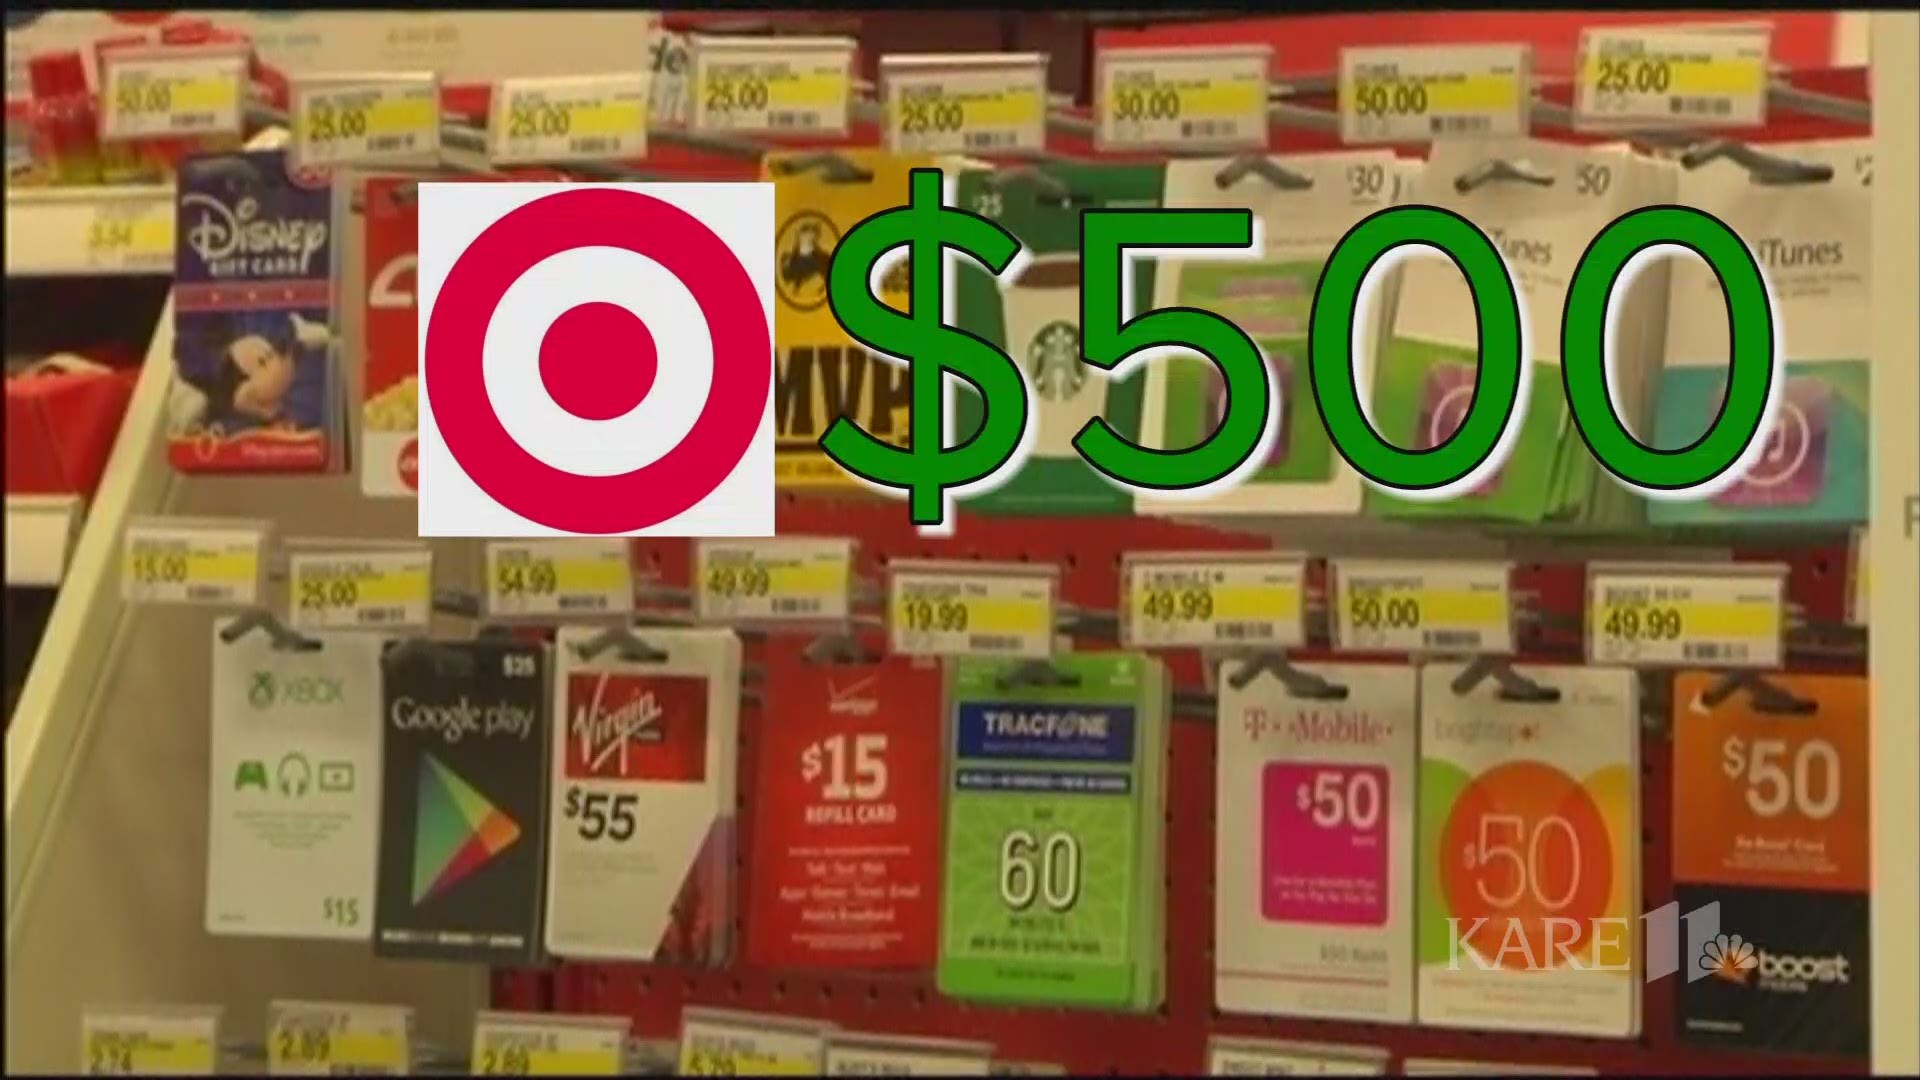 If you're feeling lucky this holiday season, you might try to win a $500 Target gift card or a $5,000 trip paid for by JCPenney. Competition for workers is stiff, so retailers are pulling out all the stops to draw new employees. https://kare11.tv/2E7w5mY